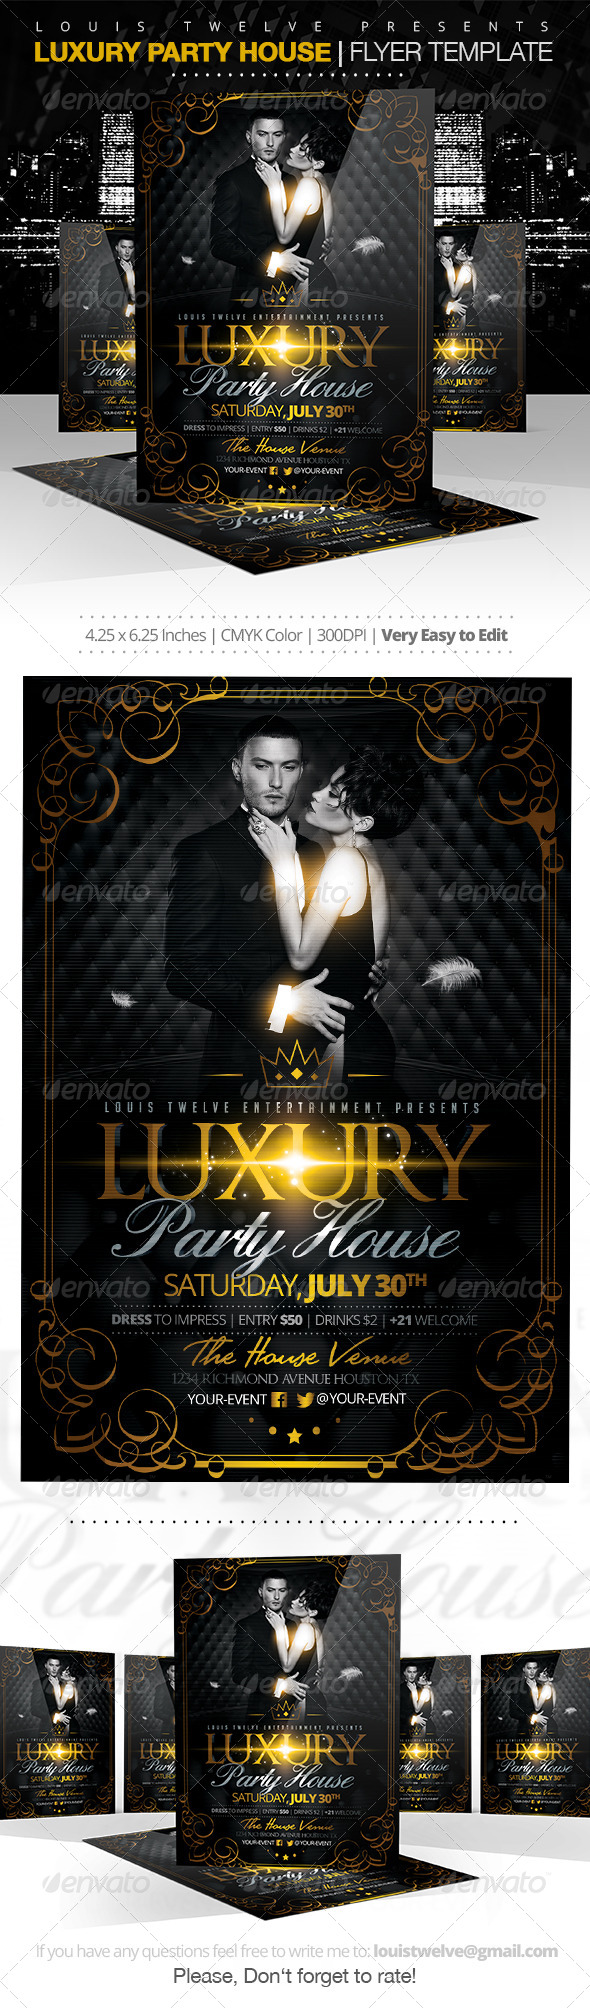 Luxury Party House | Flyer Template